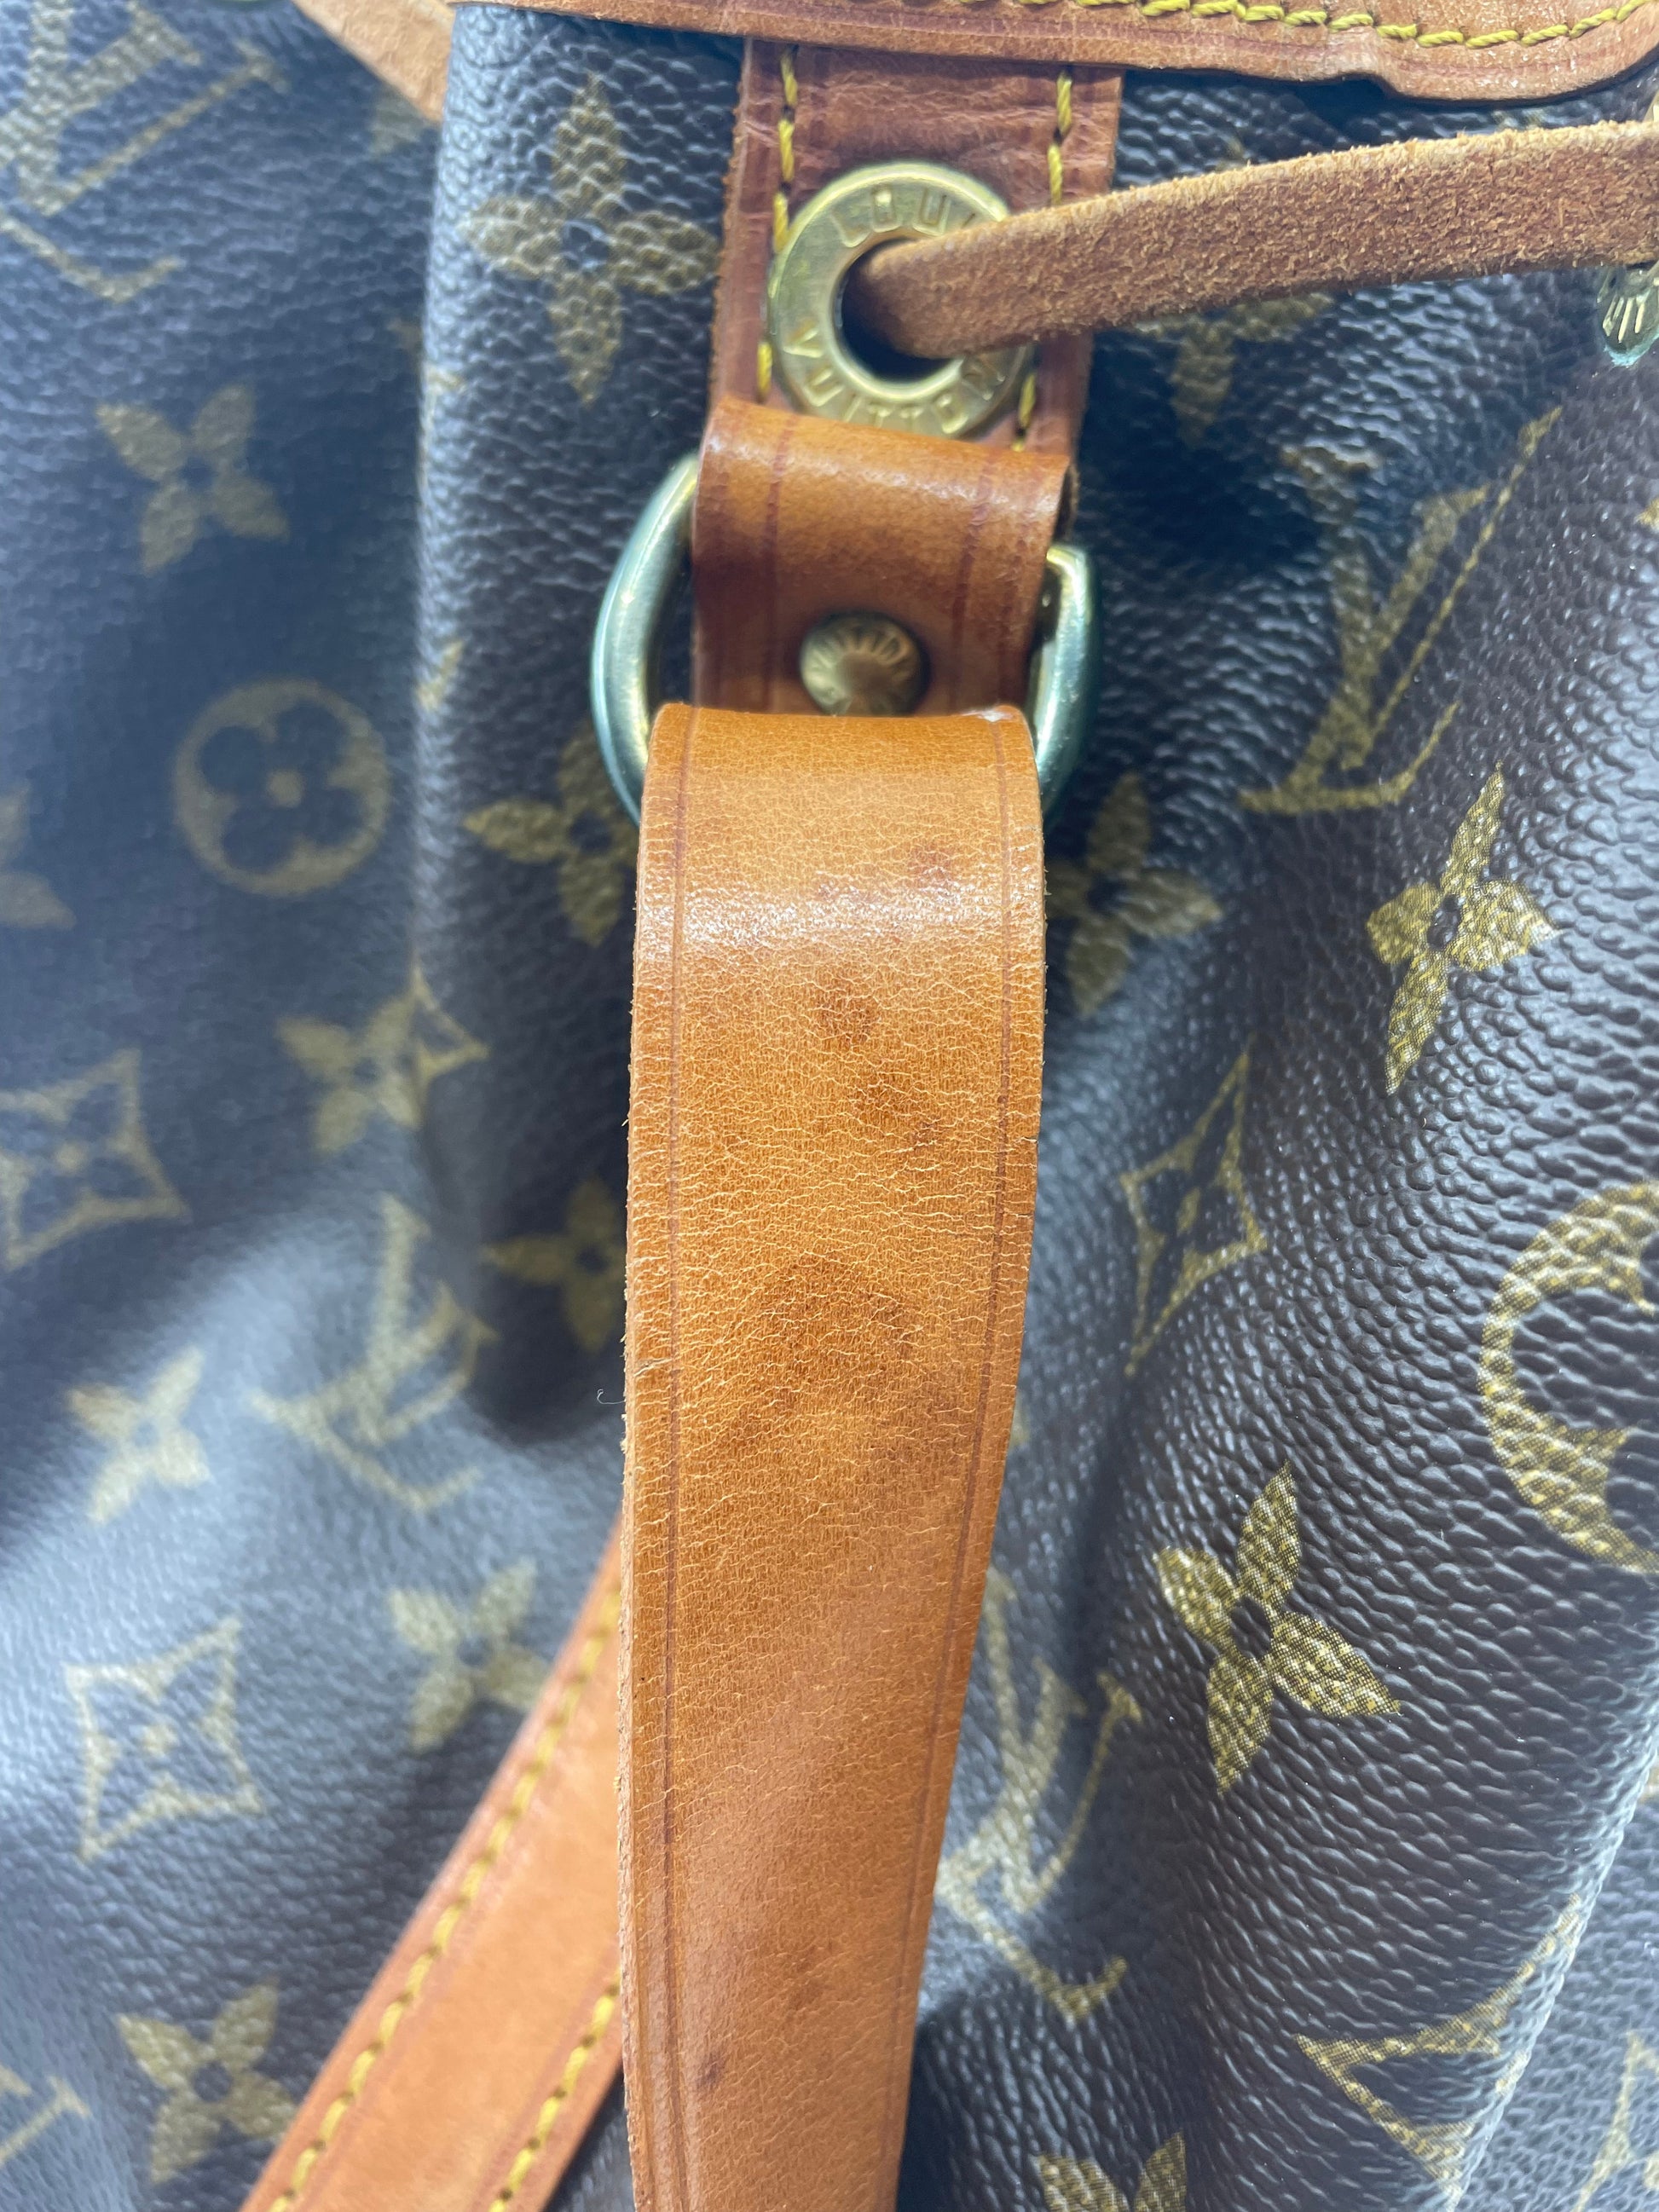 Vintage and Musthaves. Louis Vuitton petite noe bag